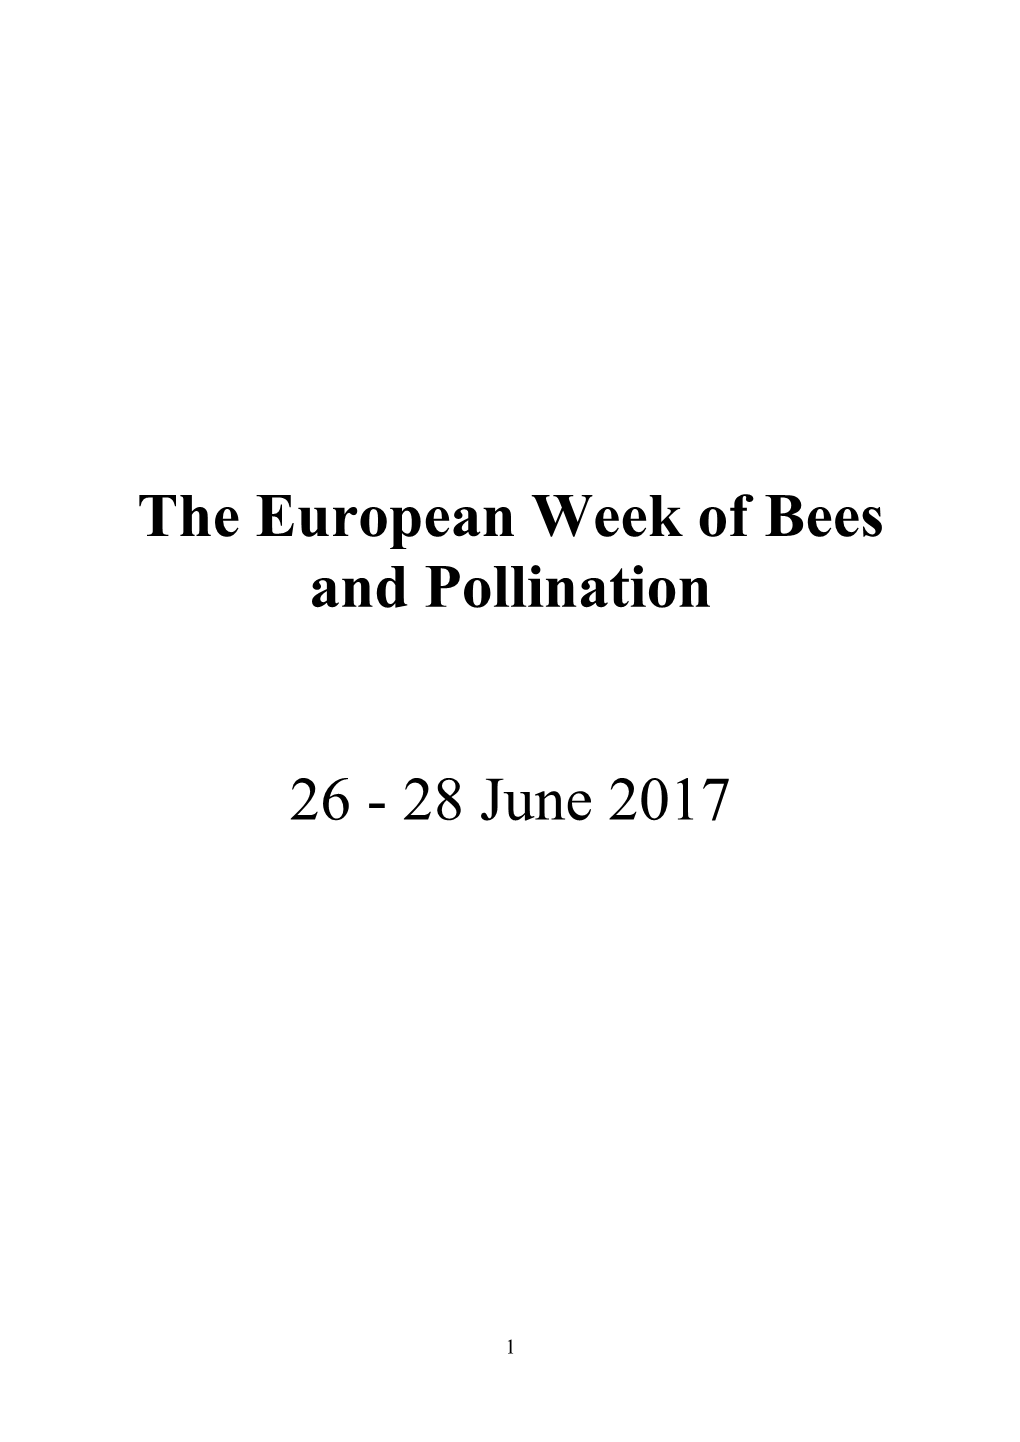 The European Week of Bees and Pollination 26